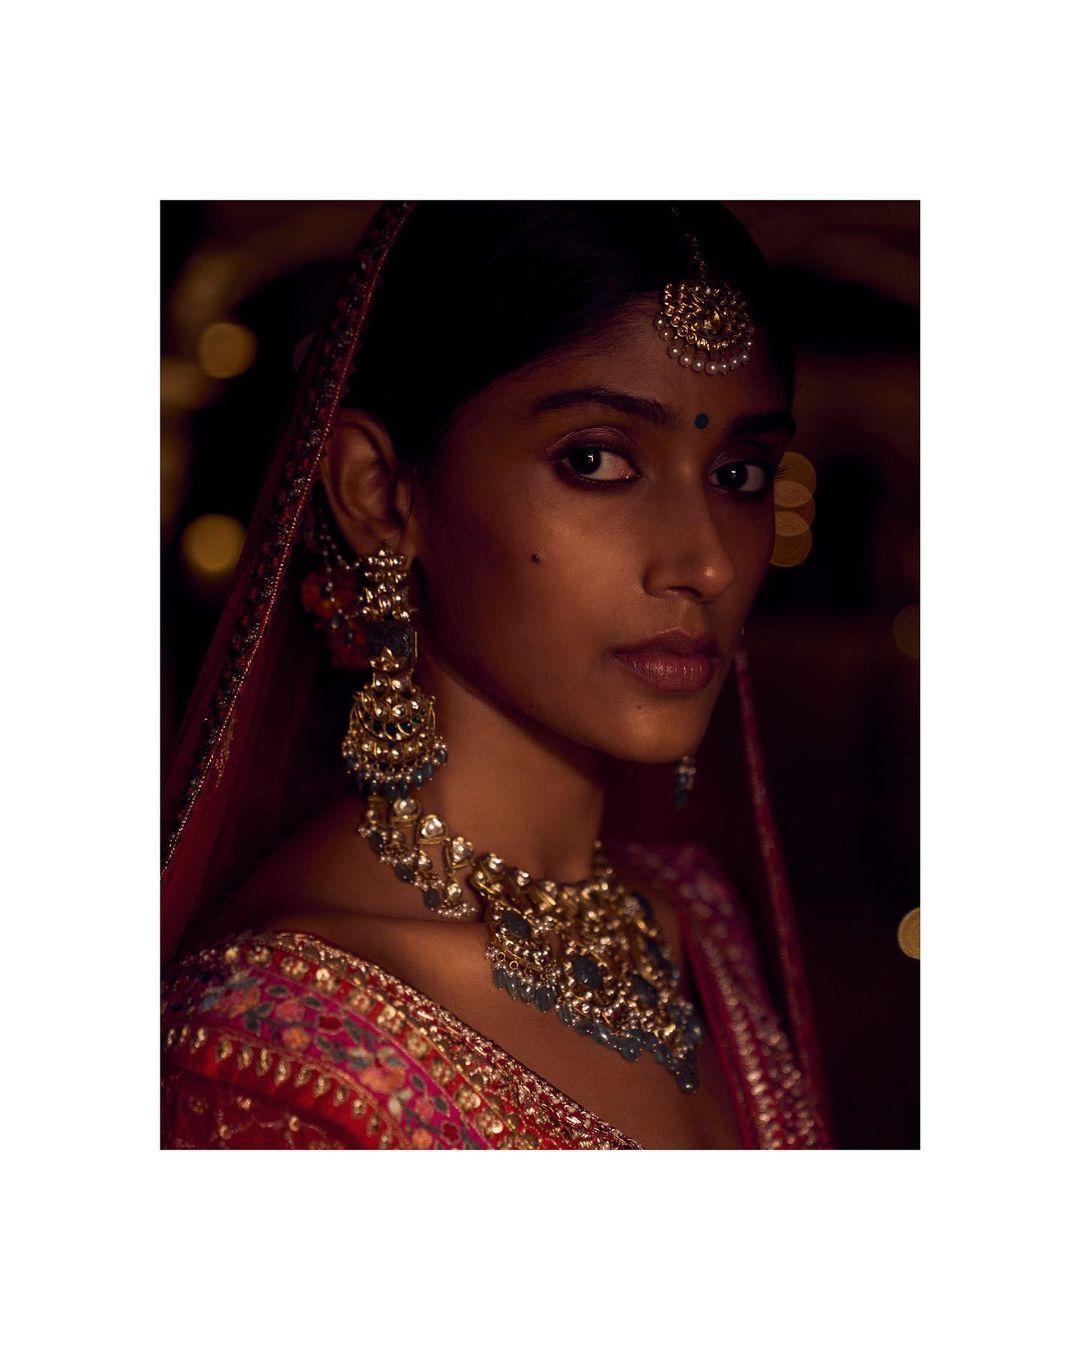 class="content__text"
 Set in 18kt hallmarked gold with diamonds, emeralds and enamel, our Indu earrings celebrates craftsmanship at its finest. 

 #AnitaDongrePinkCity #AnitaDongre #FineJewelry 

WhatsApp us on +91 9999313366 to know more. 
 